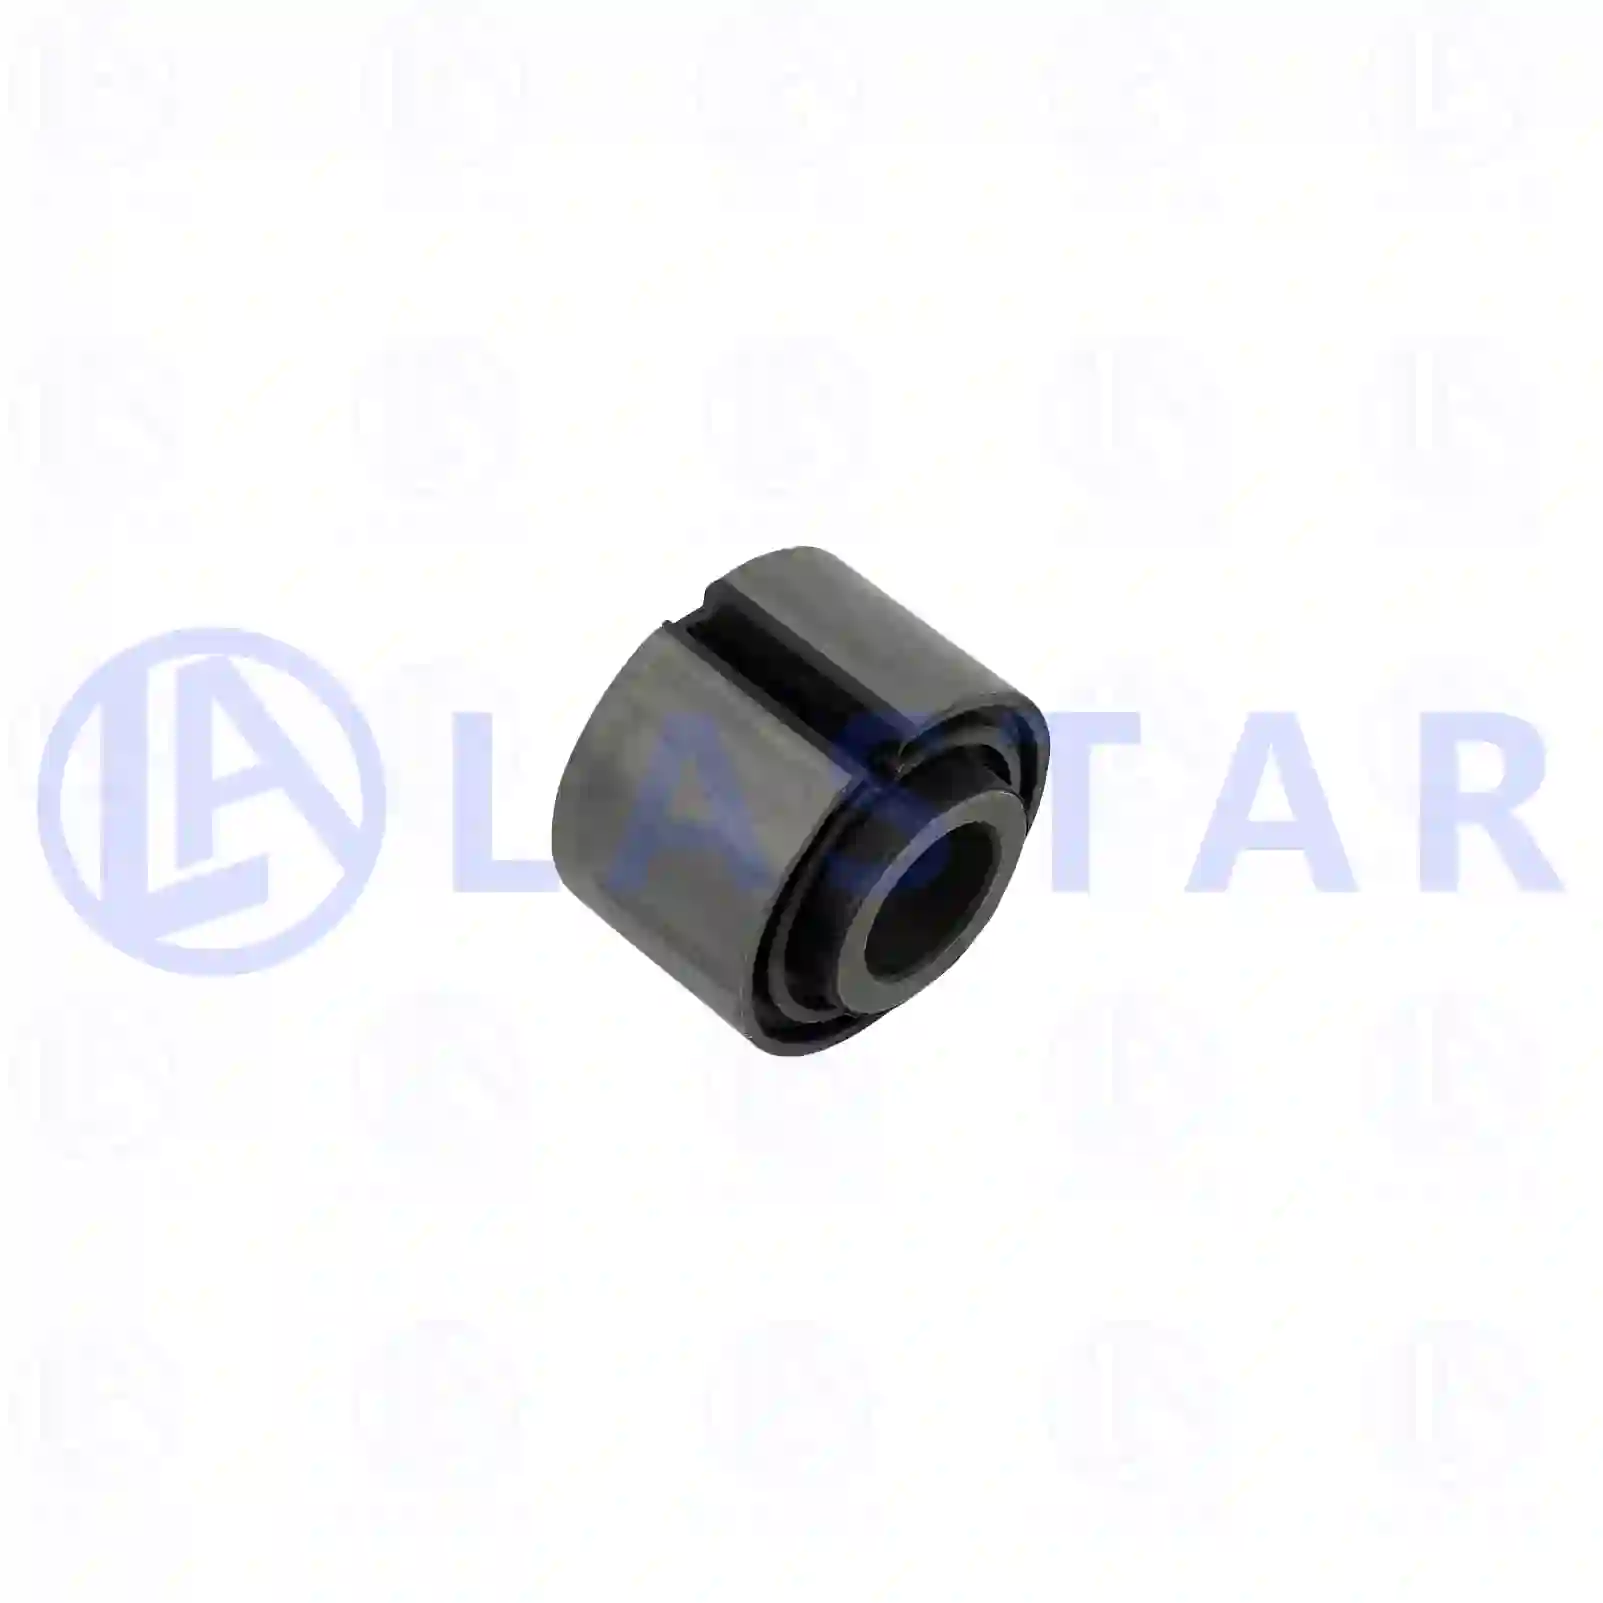 Bushing, stabilizer, 77728229, 3563230081, , , ||  77728229 Lastar Spare Part | Truck Spare Parts, Auotomotive Spare Parts Bushing, stabilizer, 77728229, 3563230081, , , ||  77728229 Lastar Spare Part | Truck Spare Parts, Auotomotive Spare Parts